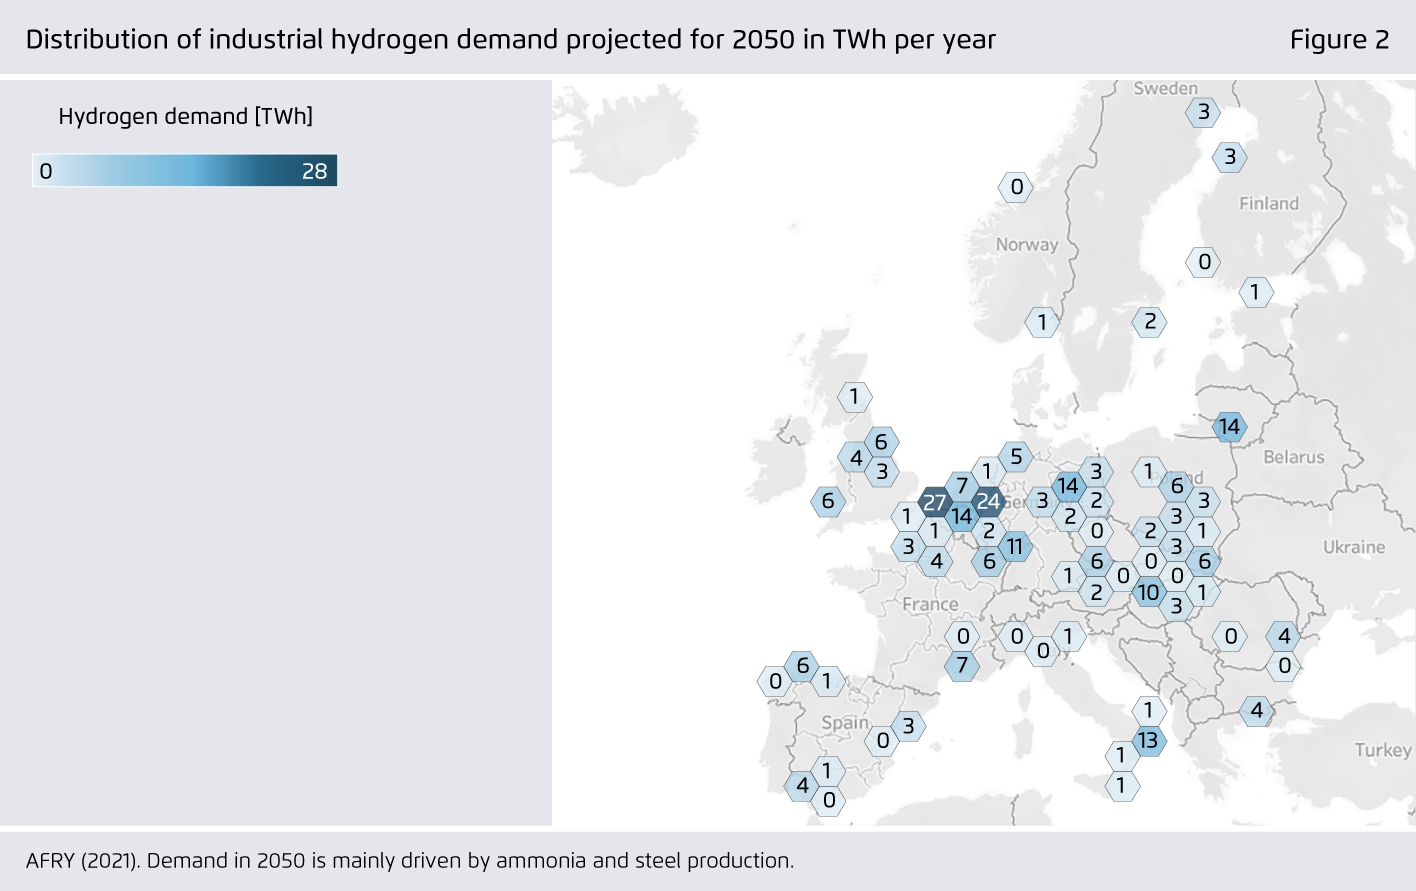 Preview for Distribution of industrial hydrogen demand projected for 2050 in TWh per year